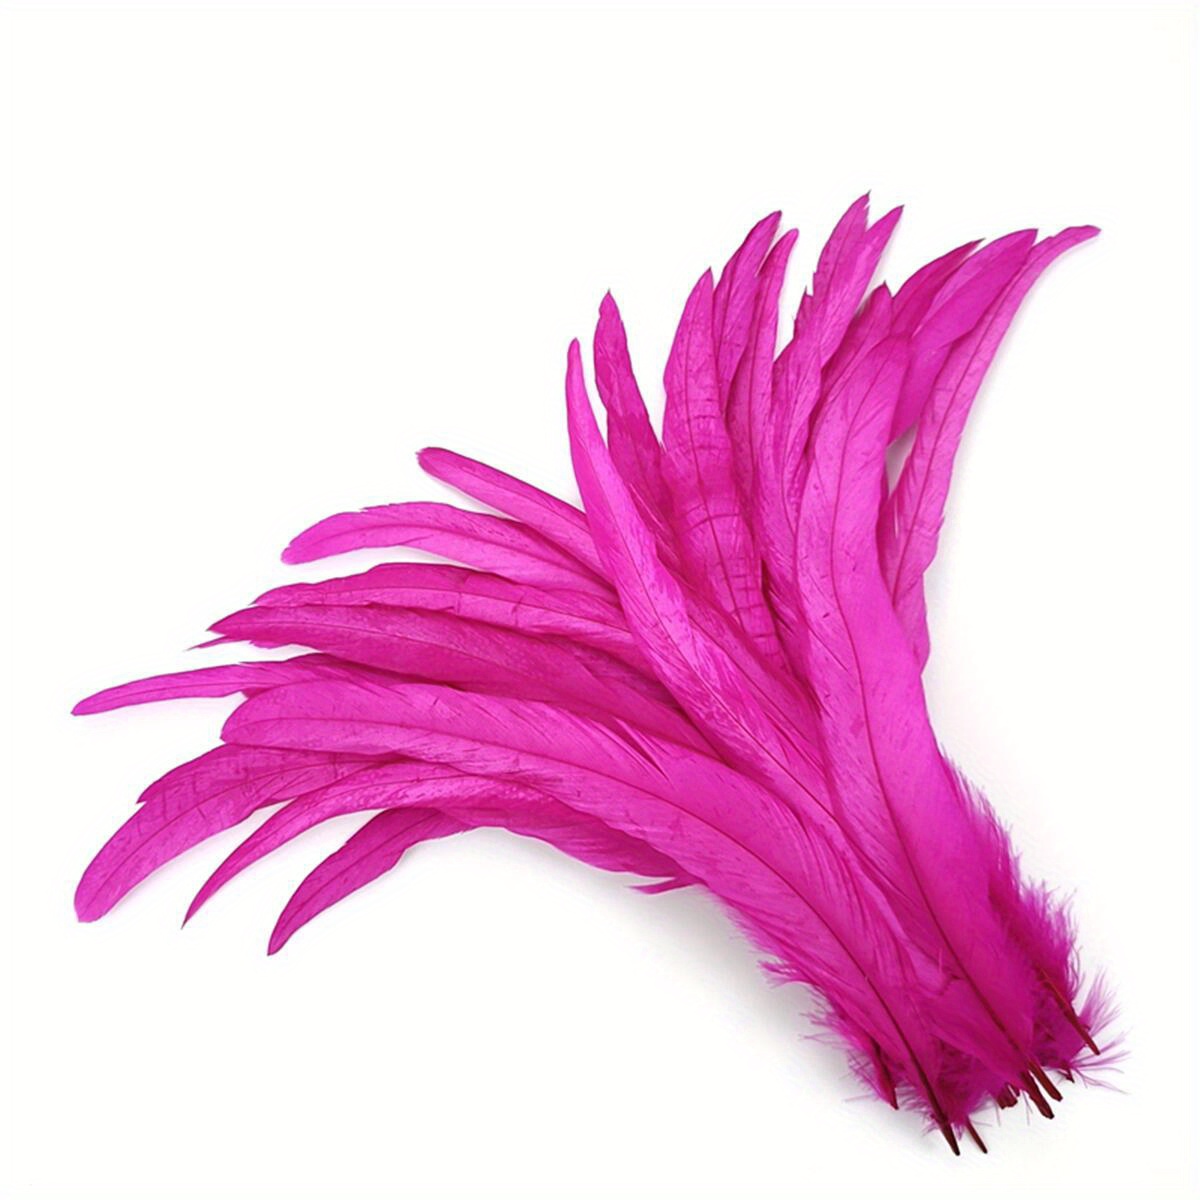 Jeniorr 100Pcs/Lot Colorful Rooster Feathers for Decoration 25-35cm 10-14  Natural Pheasant Feather Crafts Carnival Decorative - 30-35cm 12-14inch